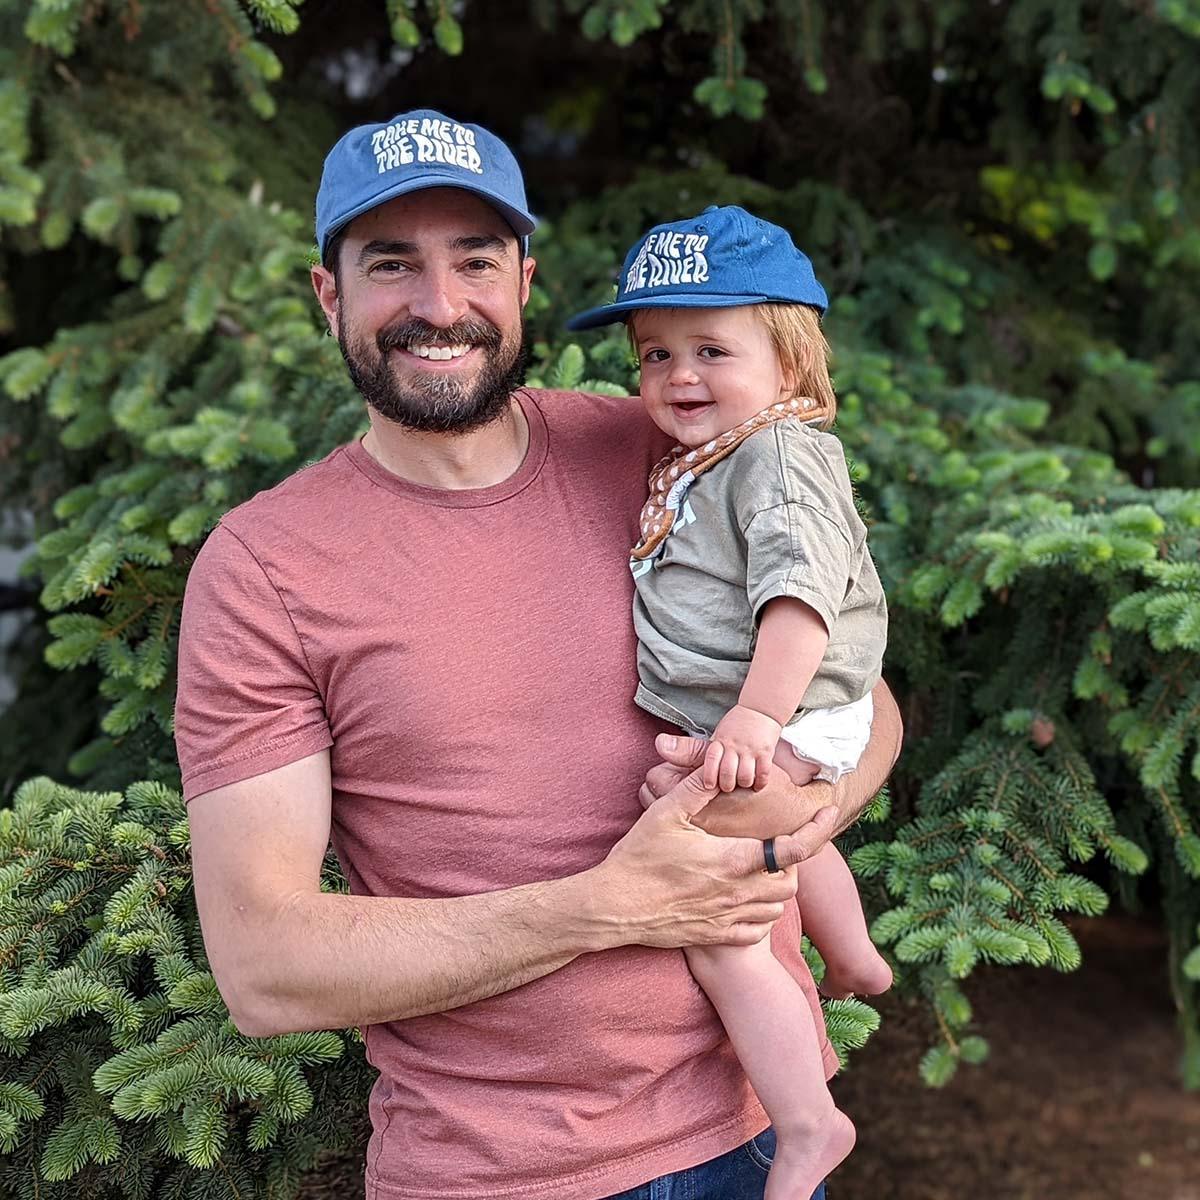 Take Me To The River Hat - Twinsie Set. Matching Kids & Adult Hats